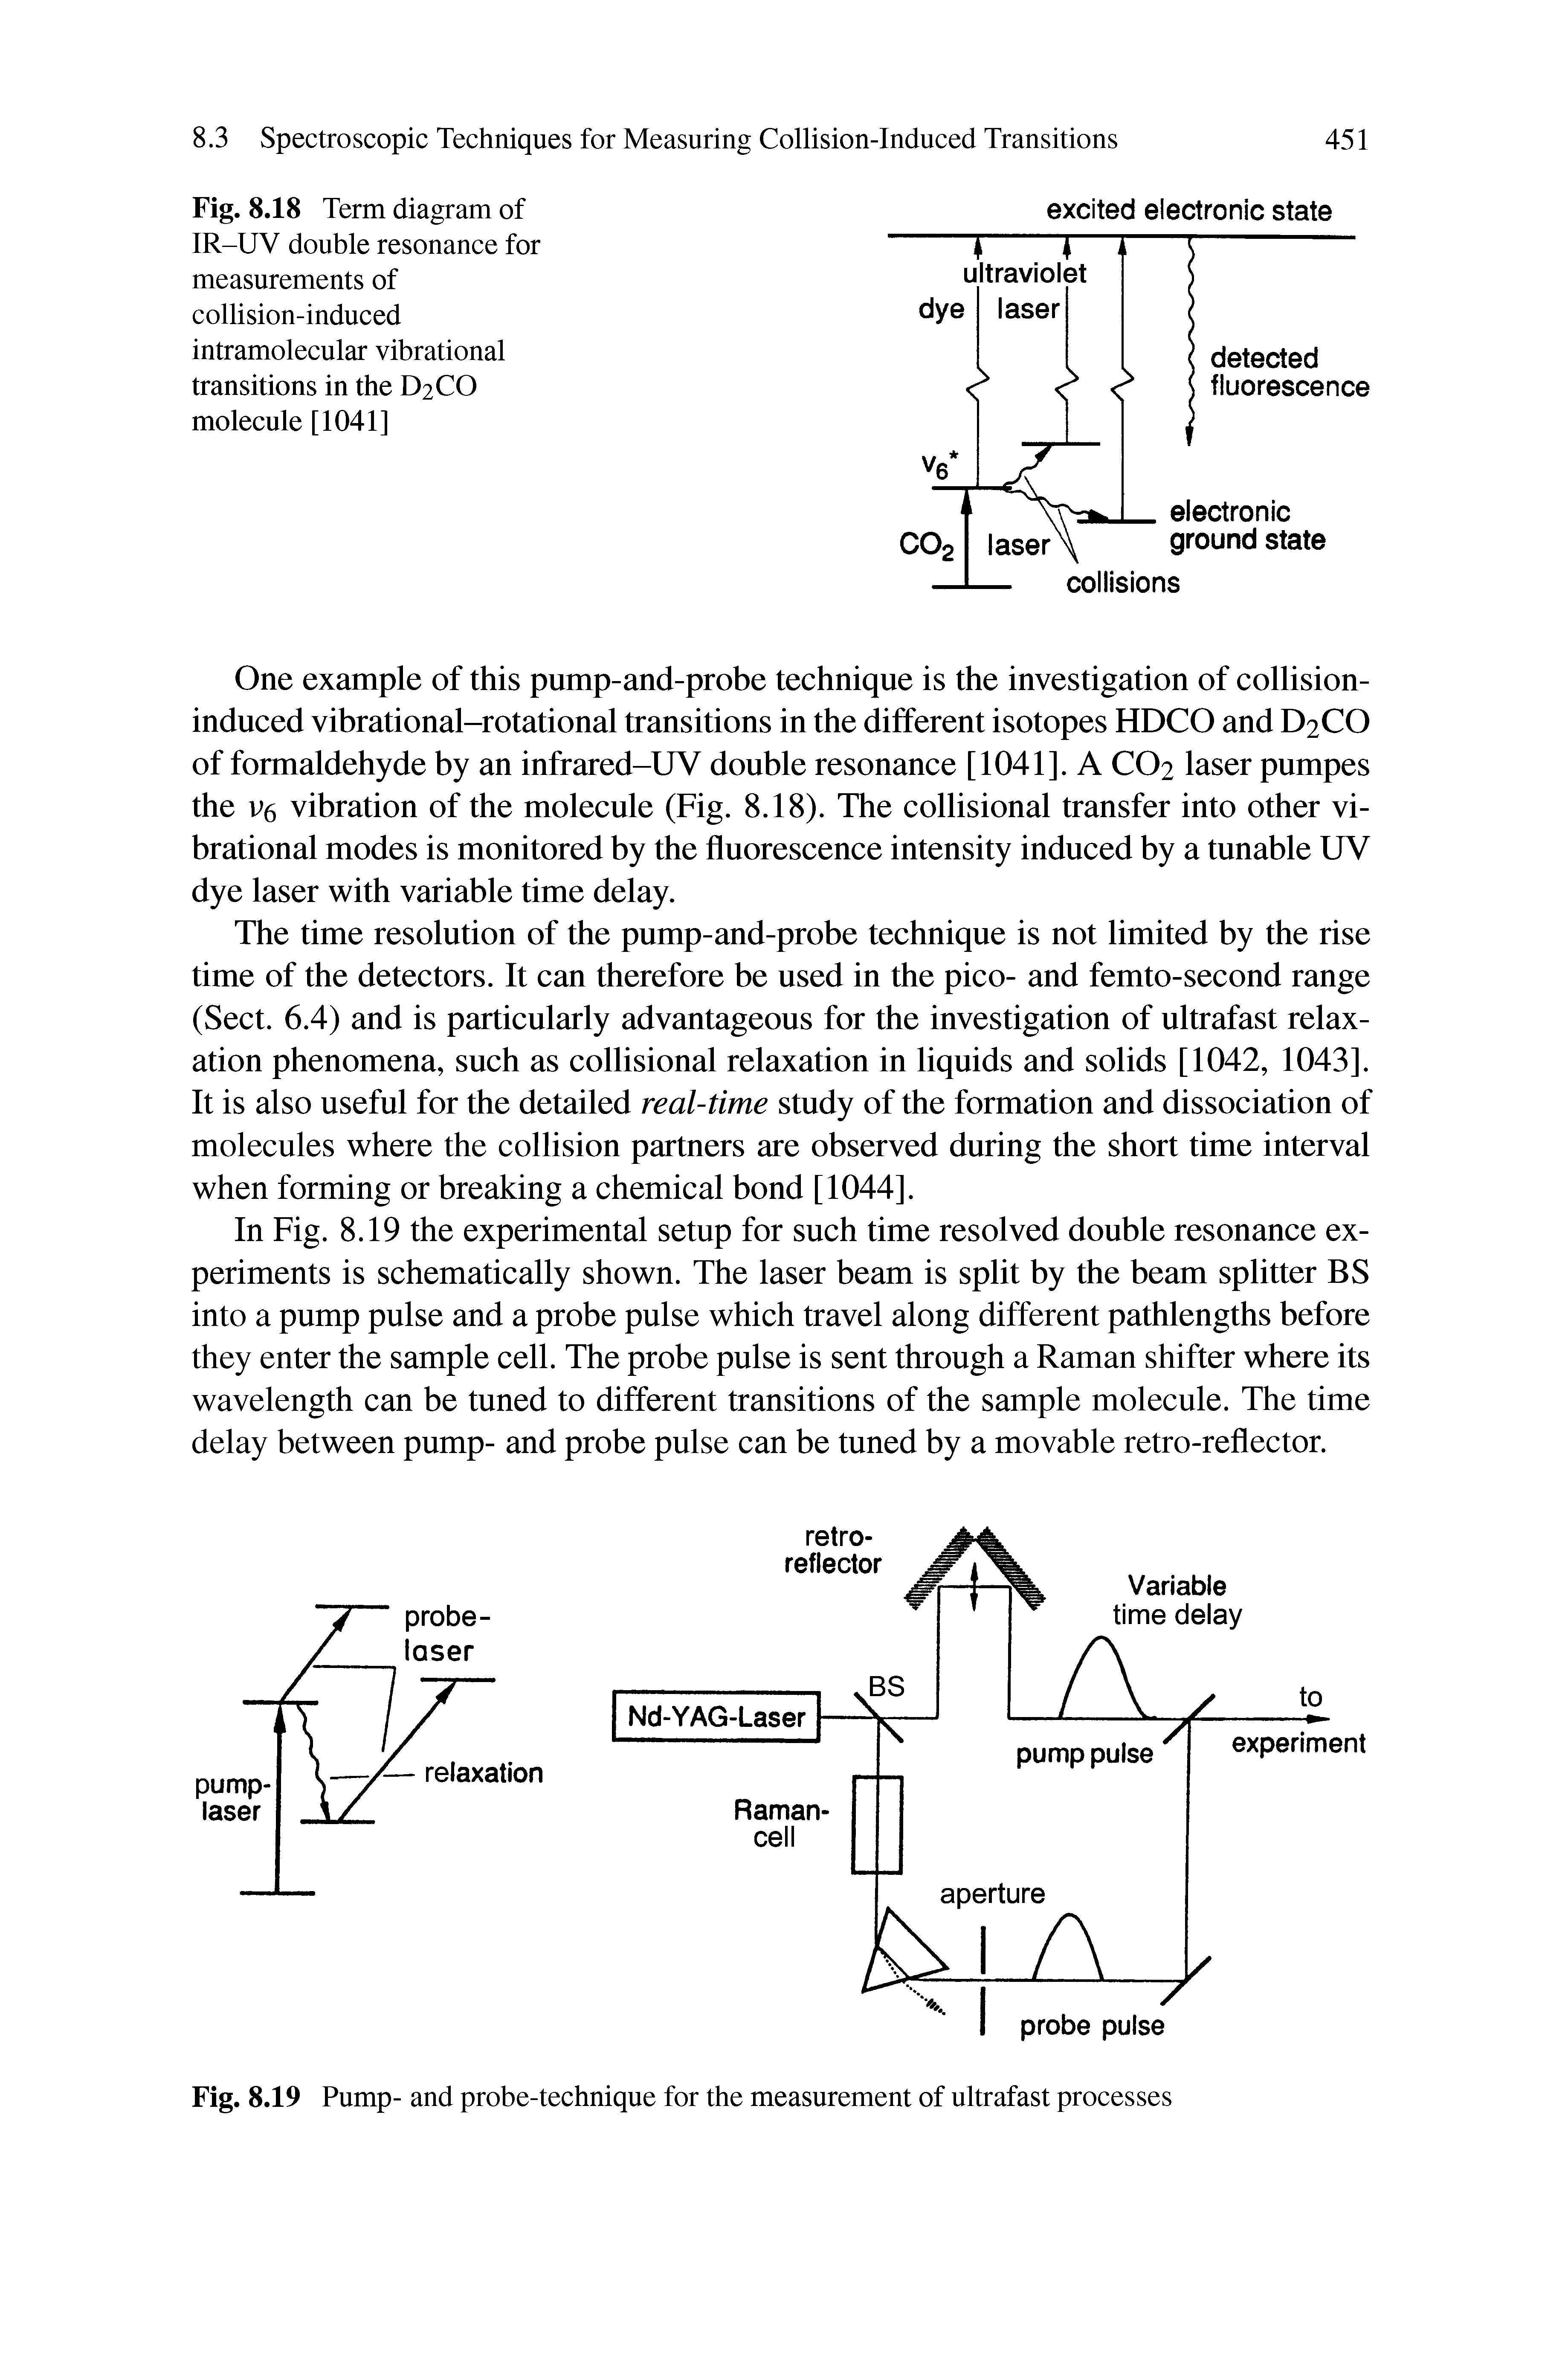 Fig. 8.19 Pump- and probe-technique for the measurement of ultrafast processes...